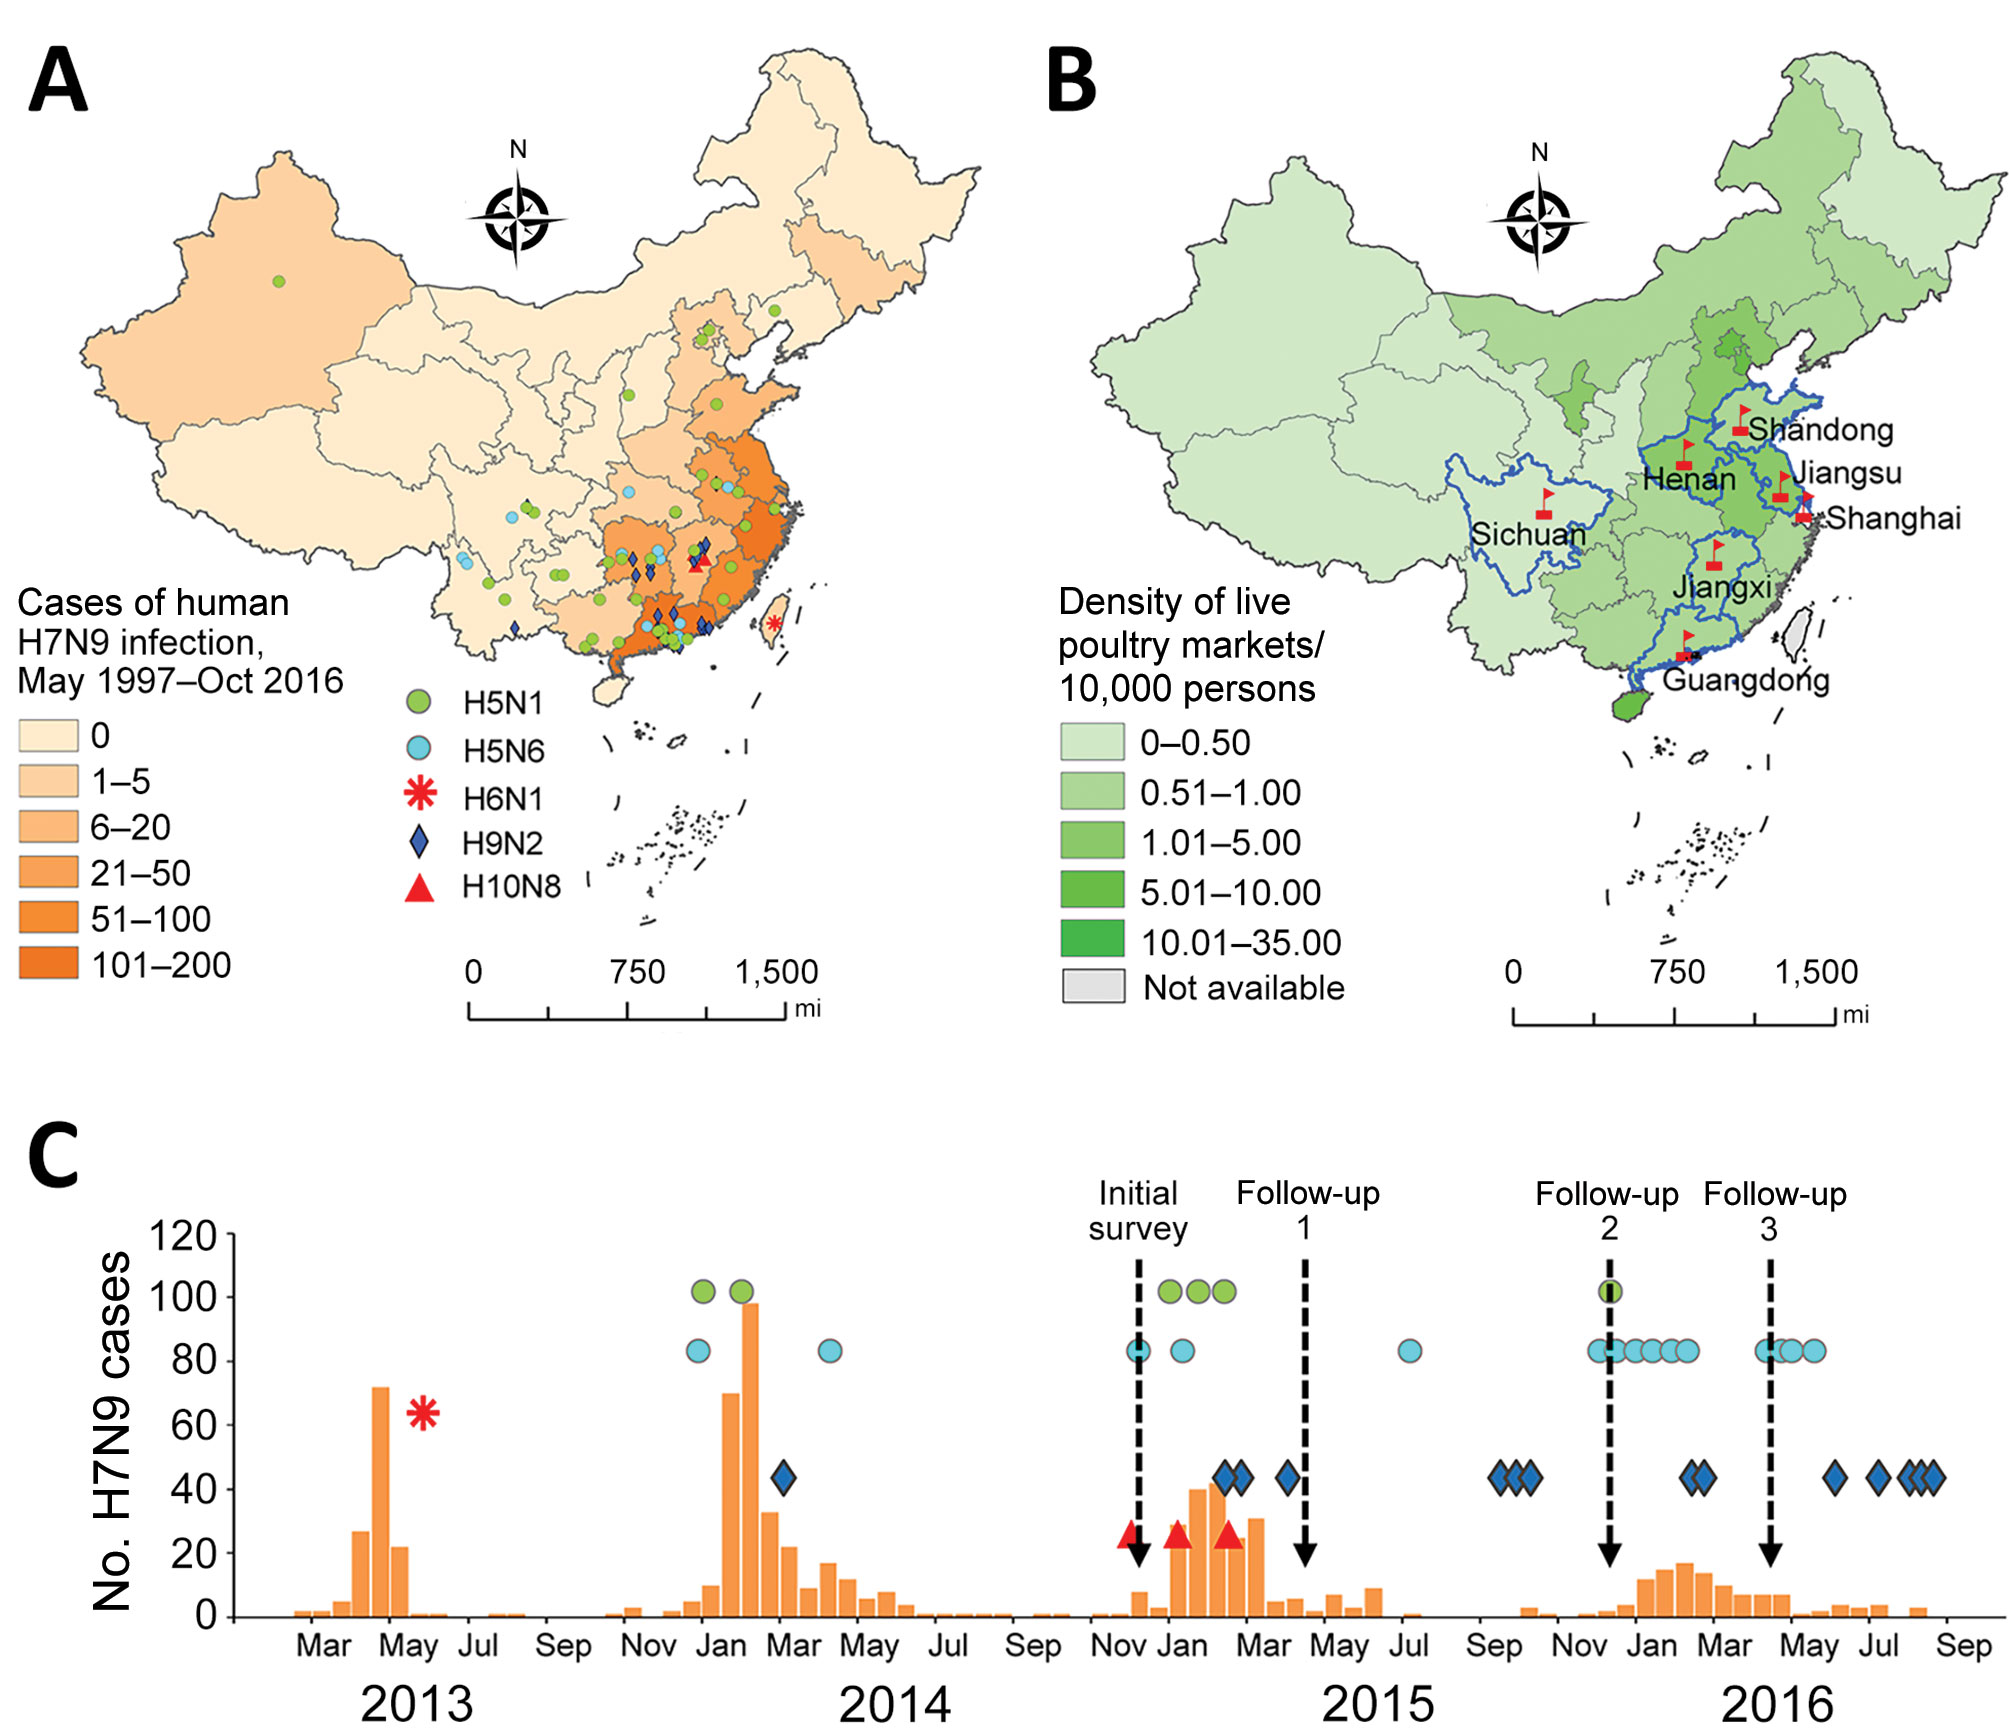 Temporal and spatial distribution of human infections with avian influenza A virus subtypes before and during serosurveillance, China. A) Geographic distribution of avian influenza A(H7N9) virus infection among humans in China during May 1997–October 2016. The number of case-patients in each province is based on data published by the World Health Organization and the National Health (https://www.who.int/influenza/human_animal_interface/avian_influenza/archive/en/) and Family Planning Commission 